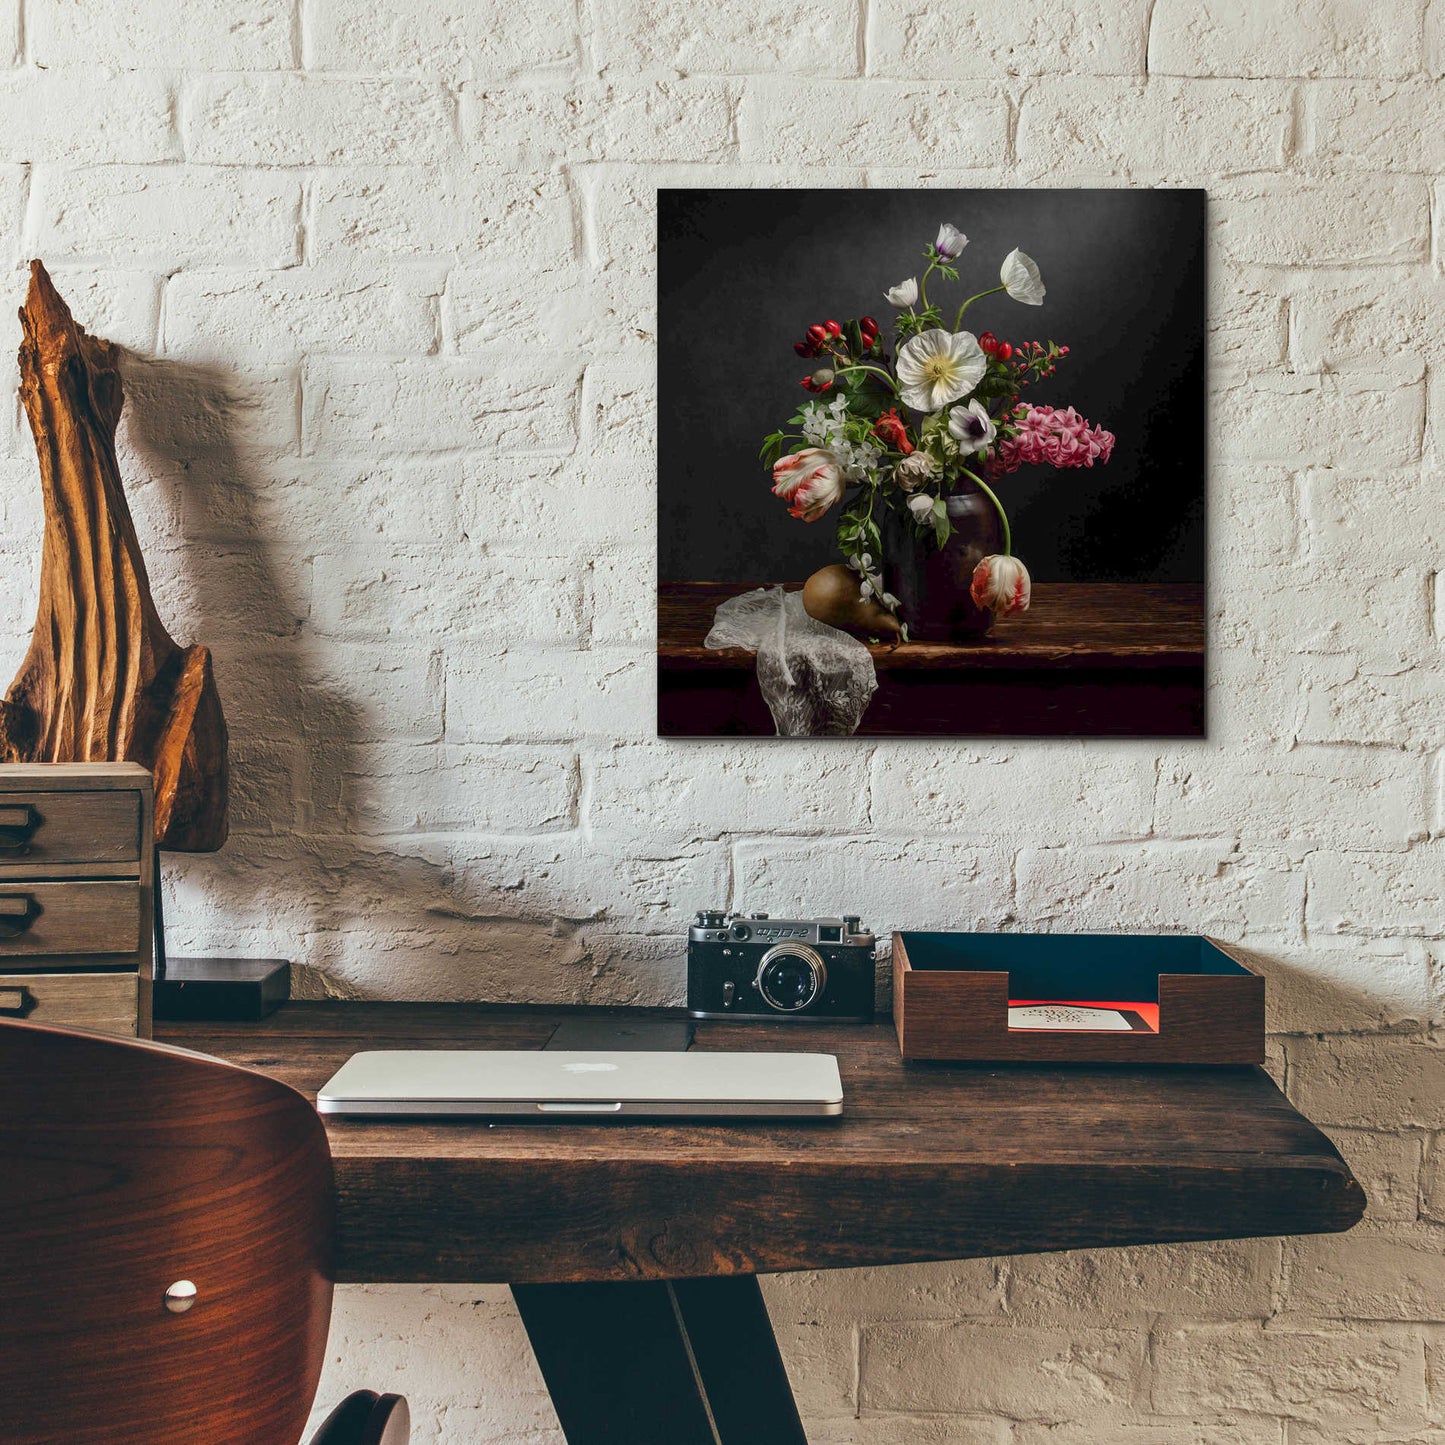 Epic Art 'Pear And Parrot Tulip Still Life' by Leah McLean Acrylic Glass Wall Art,12x12